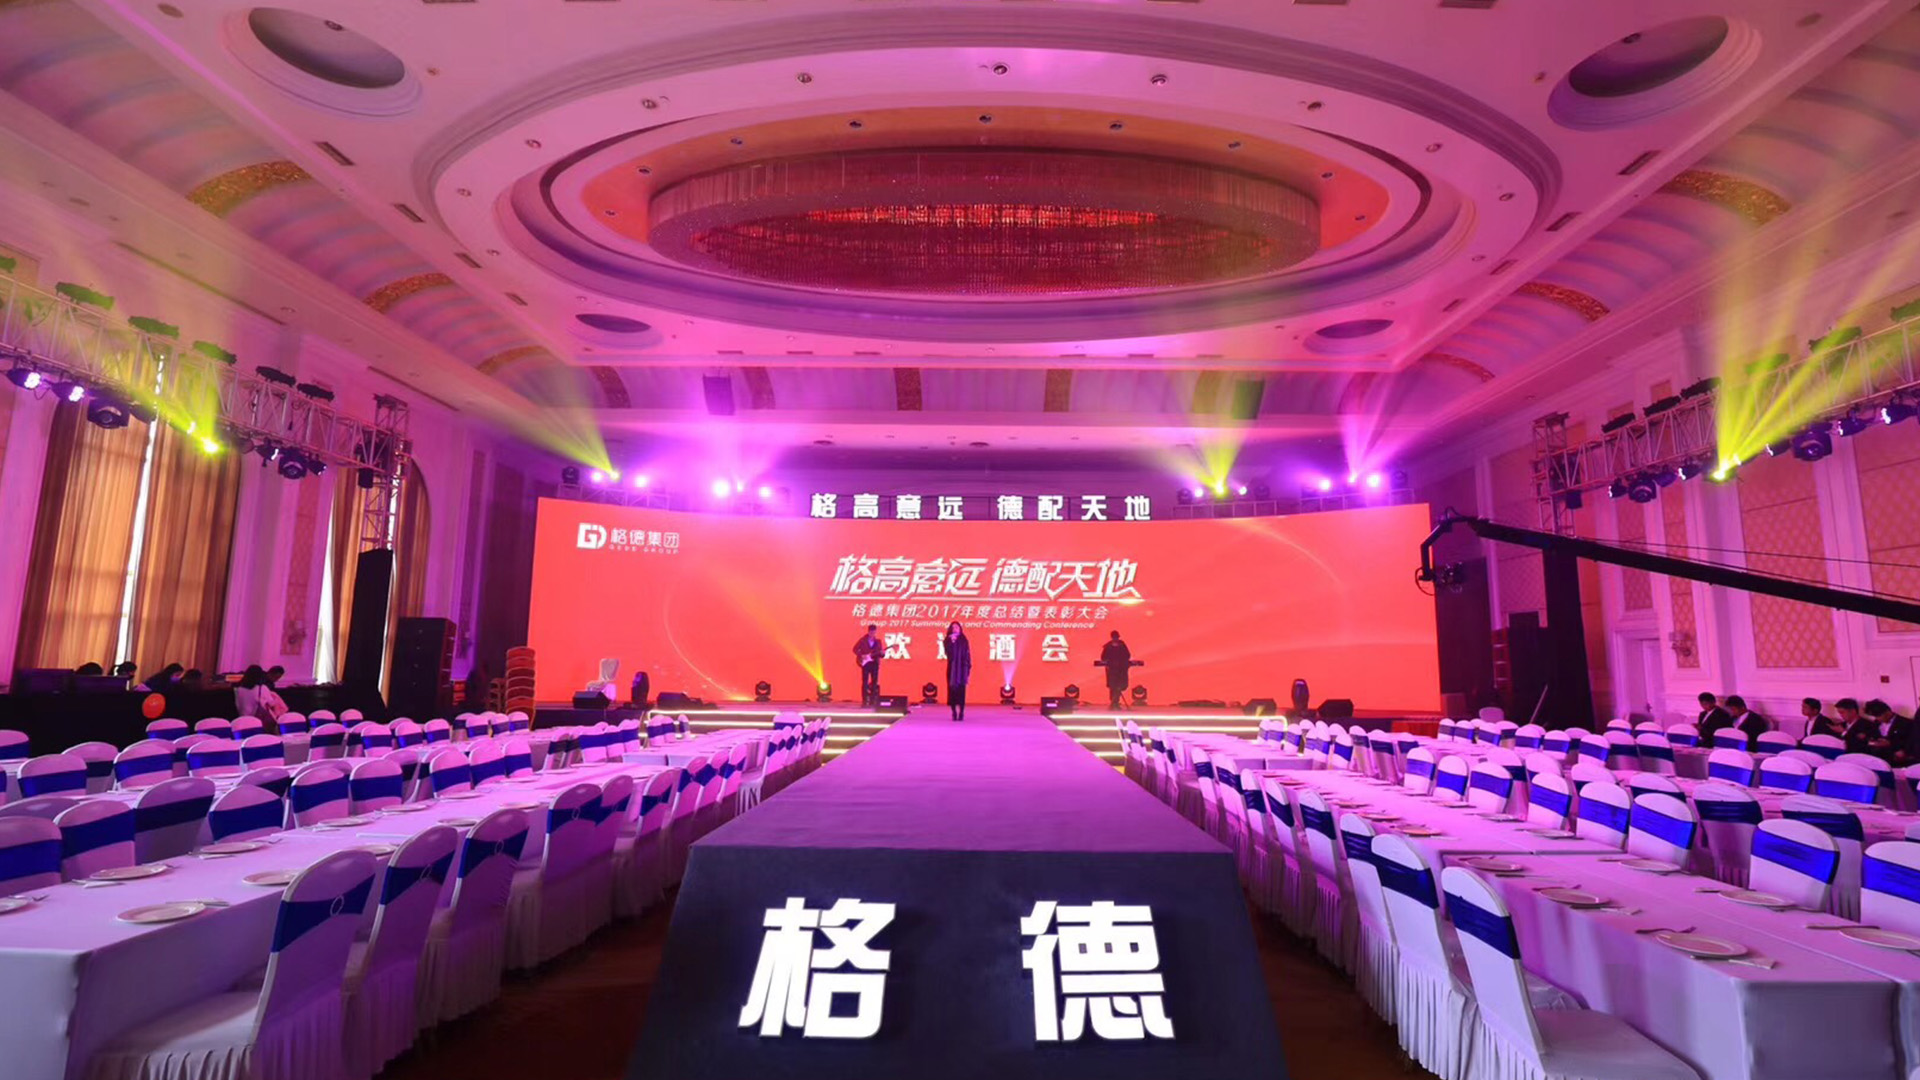 Annual Event and Conference Event for Geda Group by D2 Studio Event Planner Event Agency Event Planner Hong Kong and Guangzhou China who does Annual Event and Conference Event 8